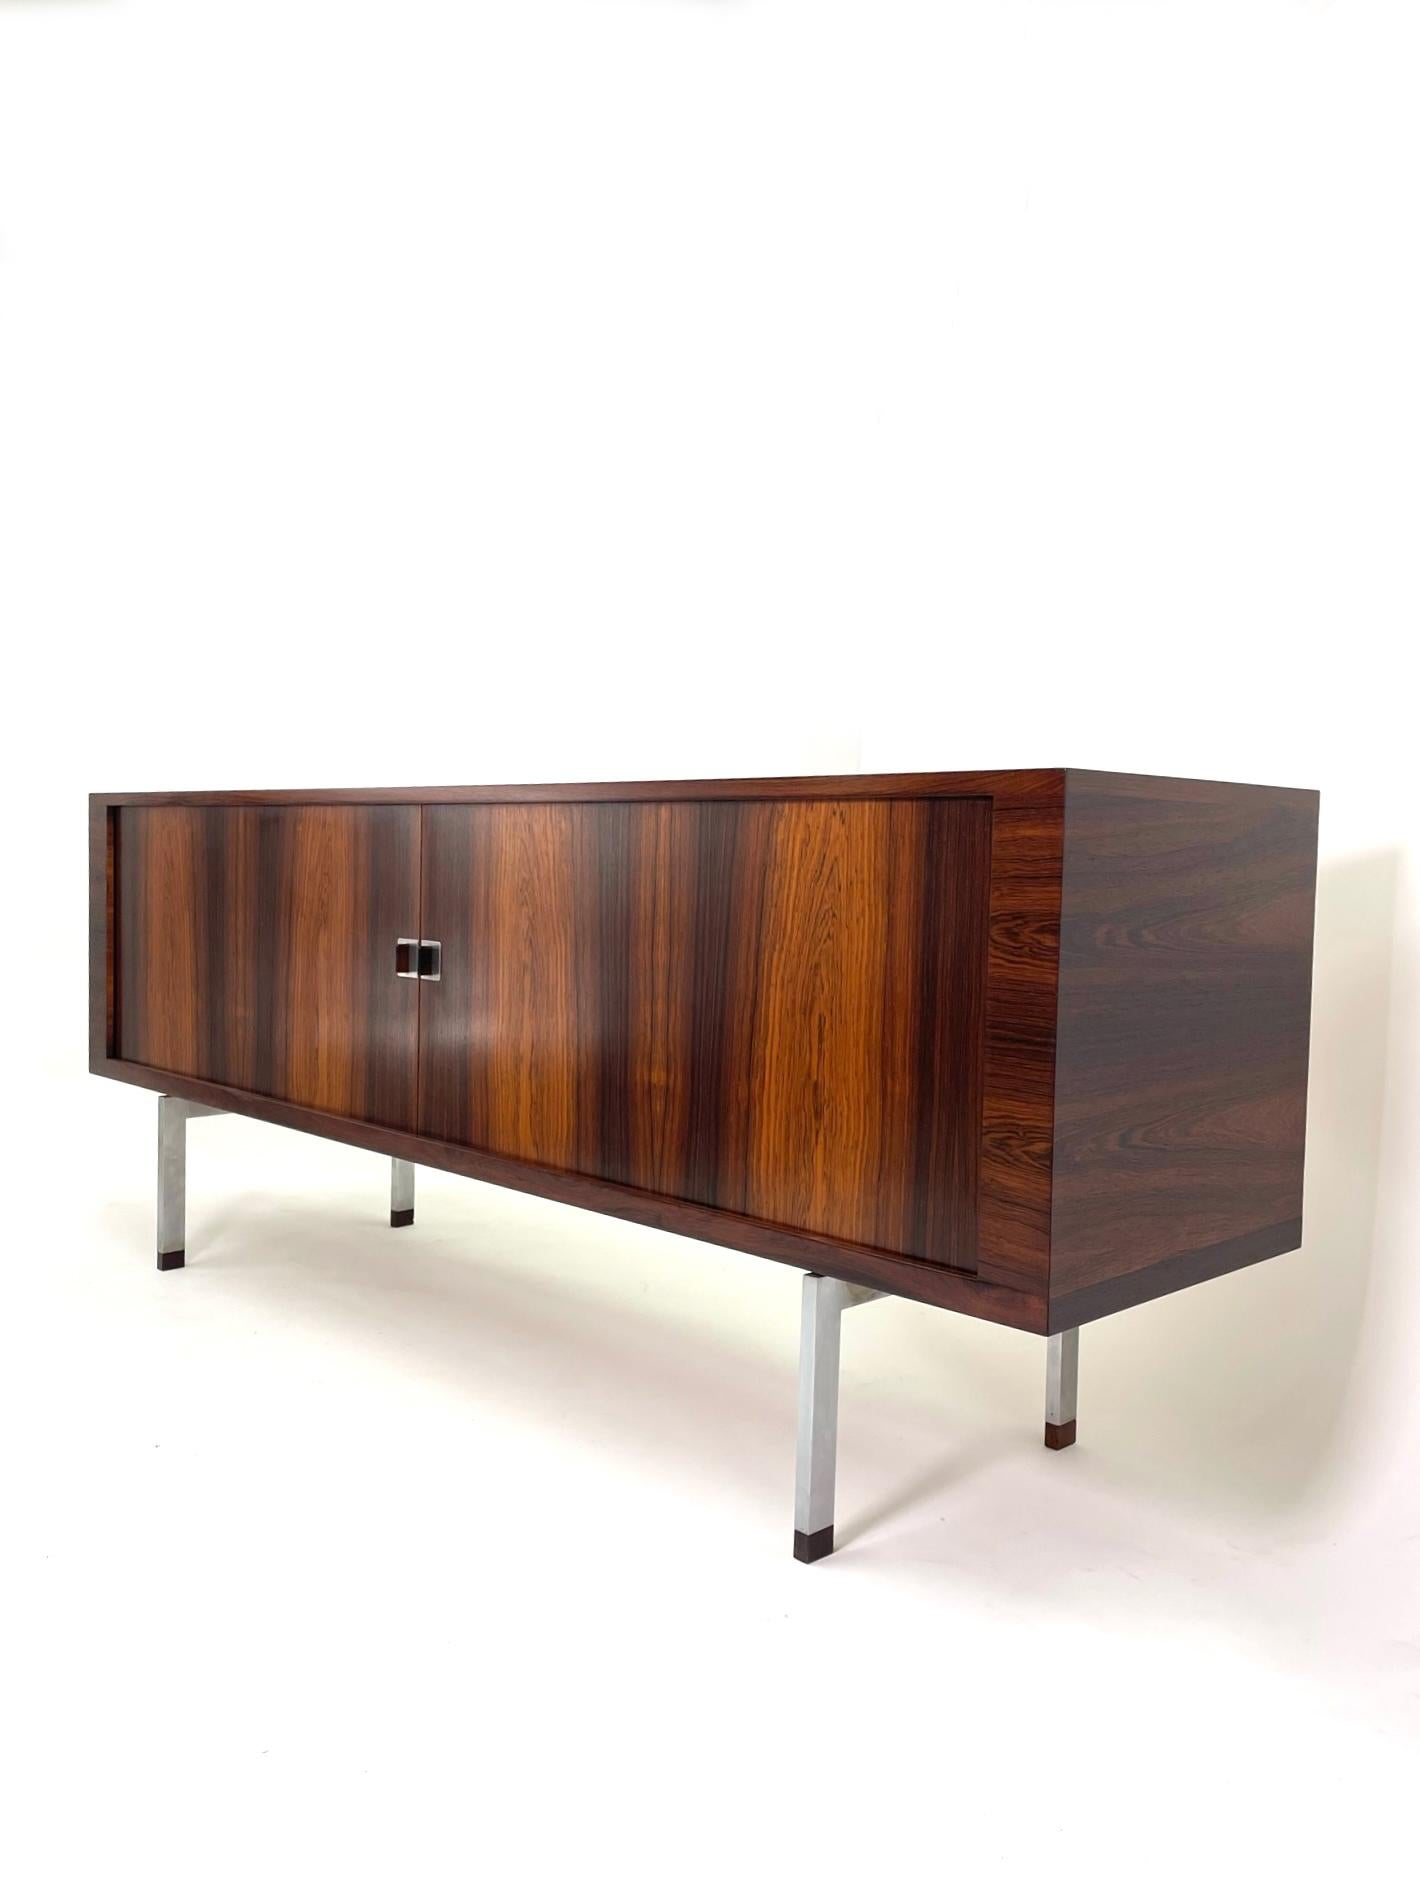 Rare Hans Wegner RY-25 Rosewood Sideboard for Ry Mobler In Good Condition For Sale In San Diego, CA